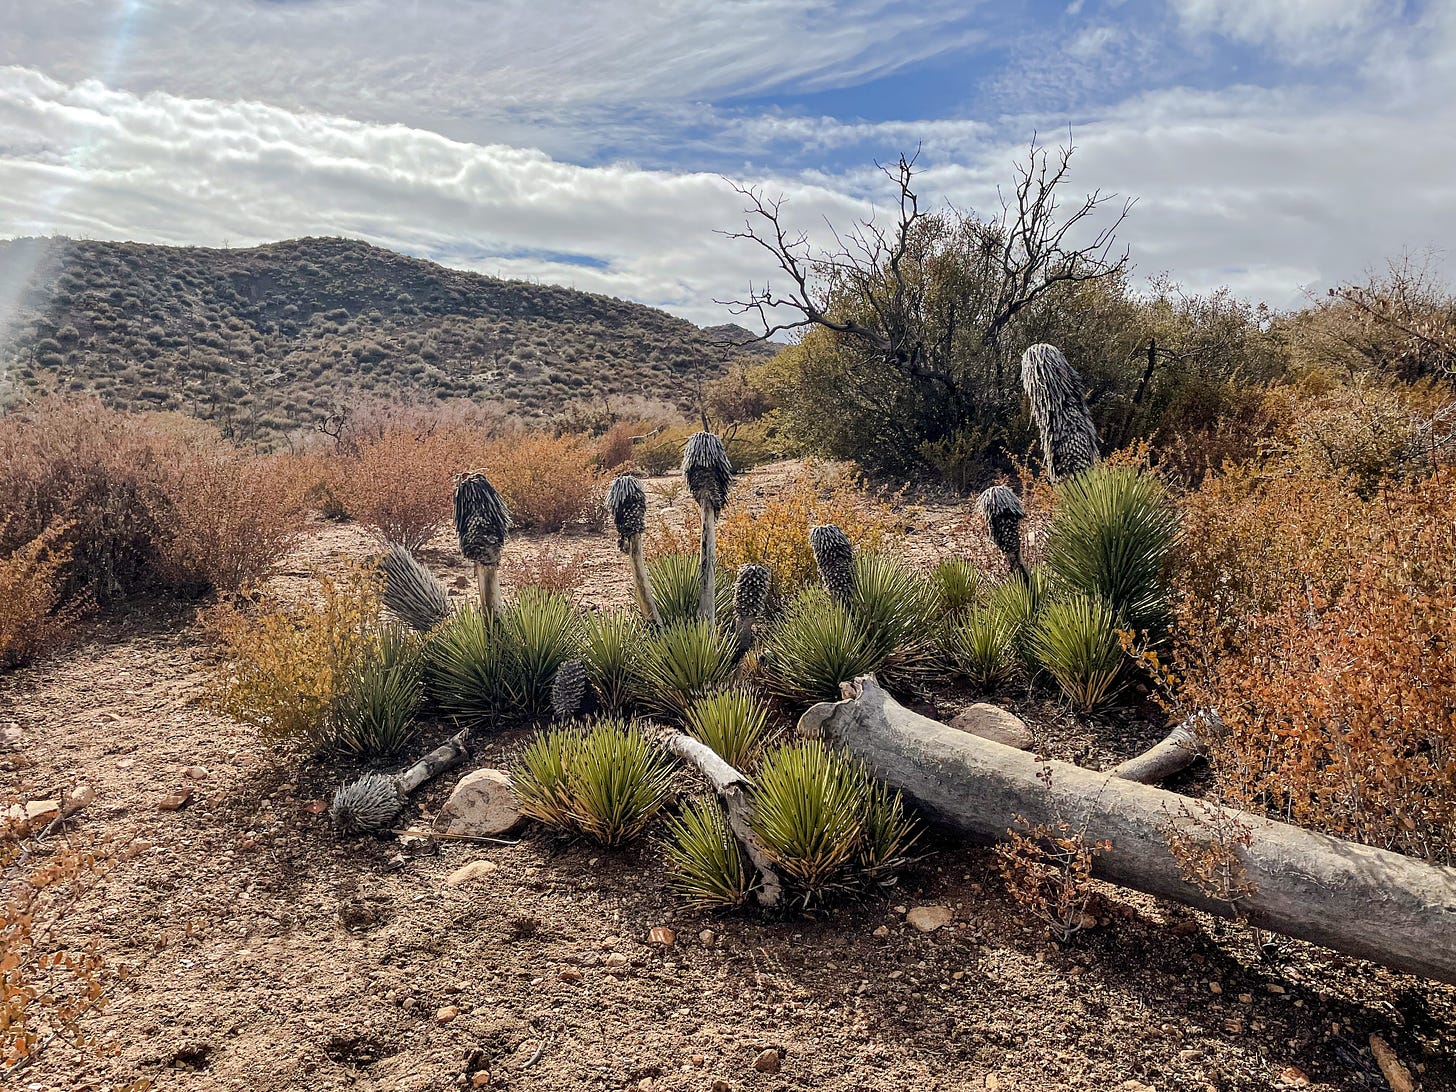 Multiple small Joshua trees sprout from a burned Joshua tree husk long deceased.